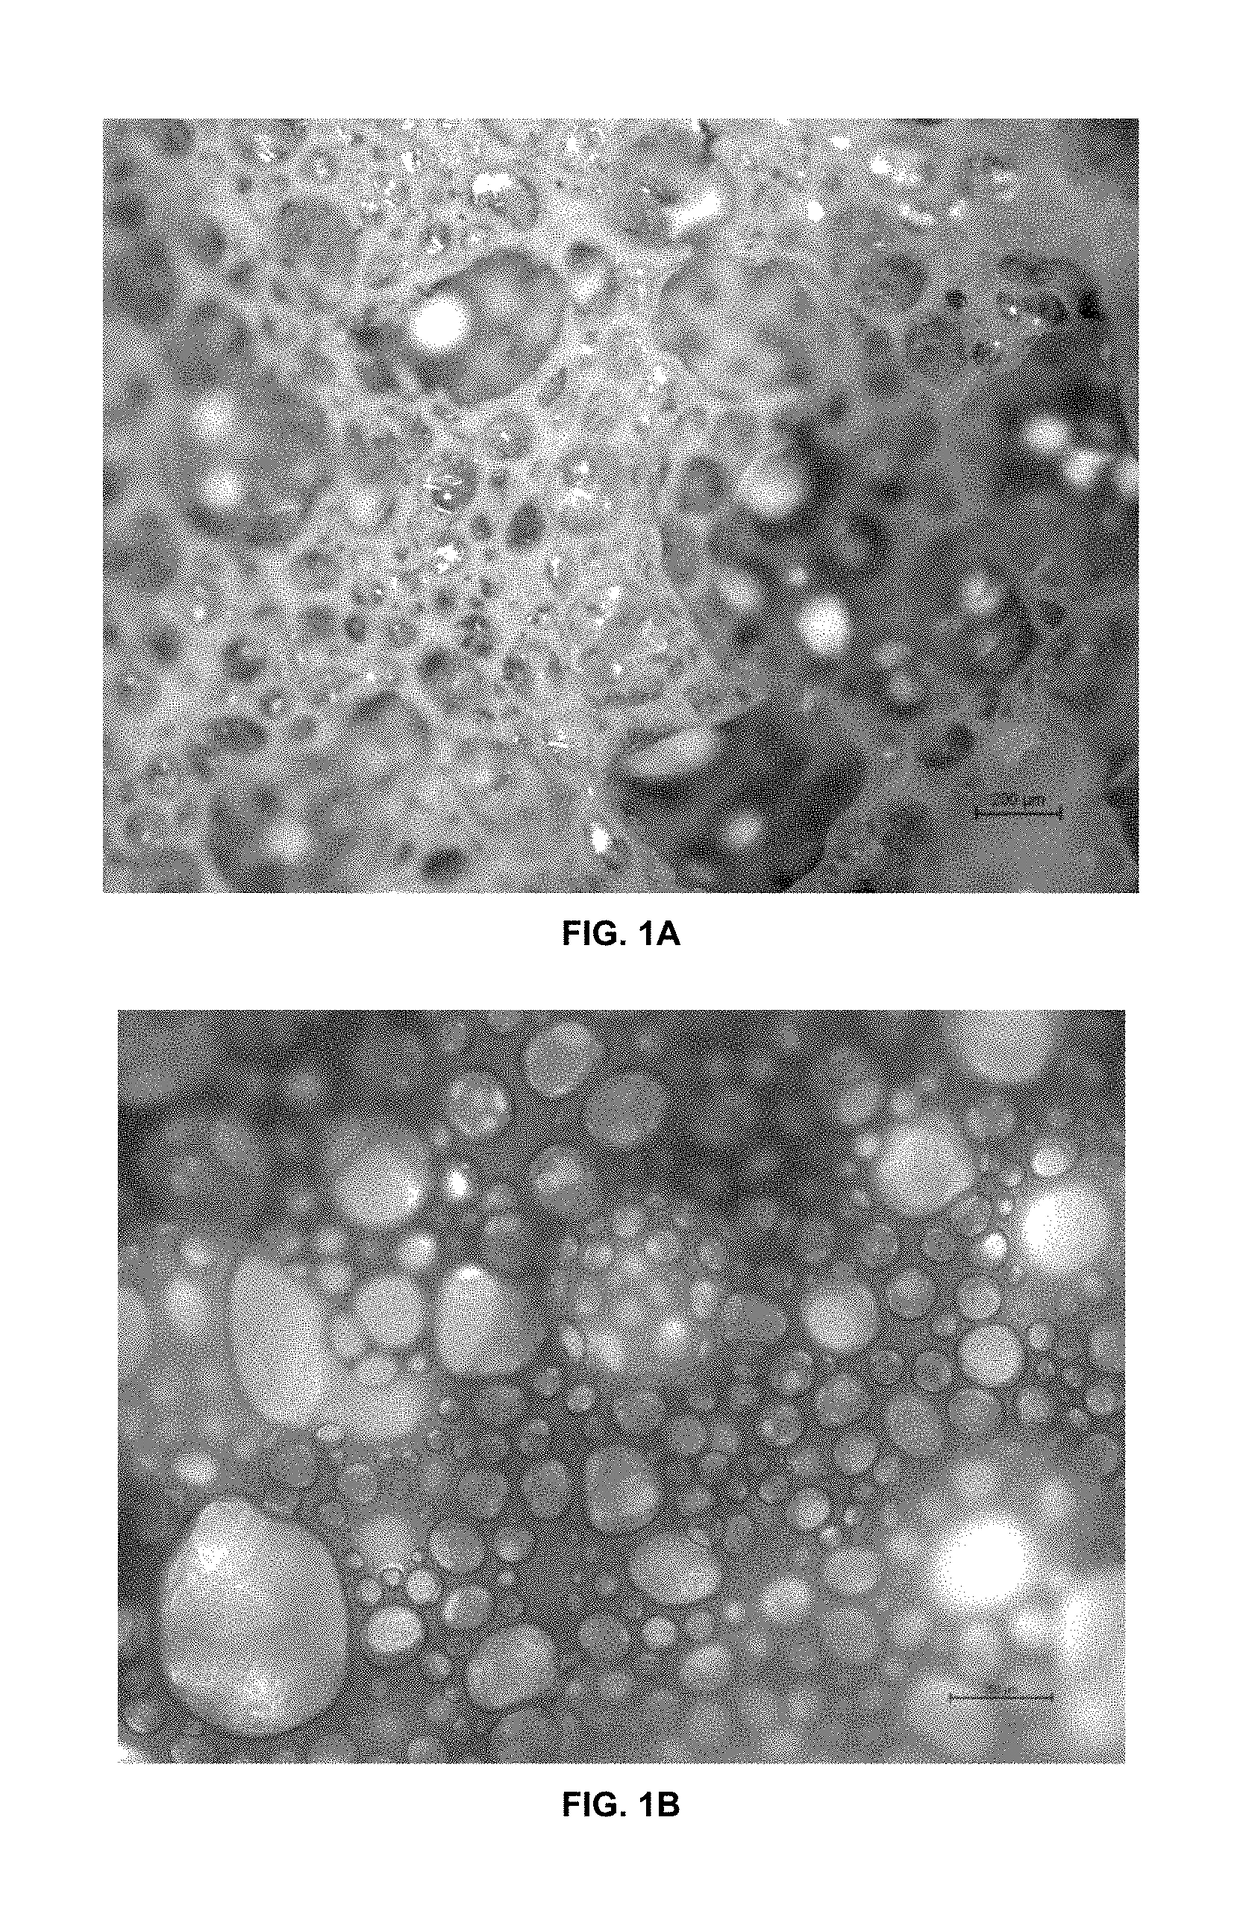 Method of coating a substrate with a particle stabilized foam